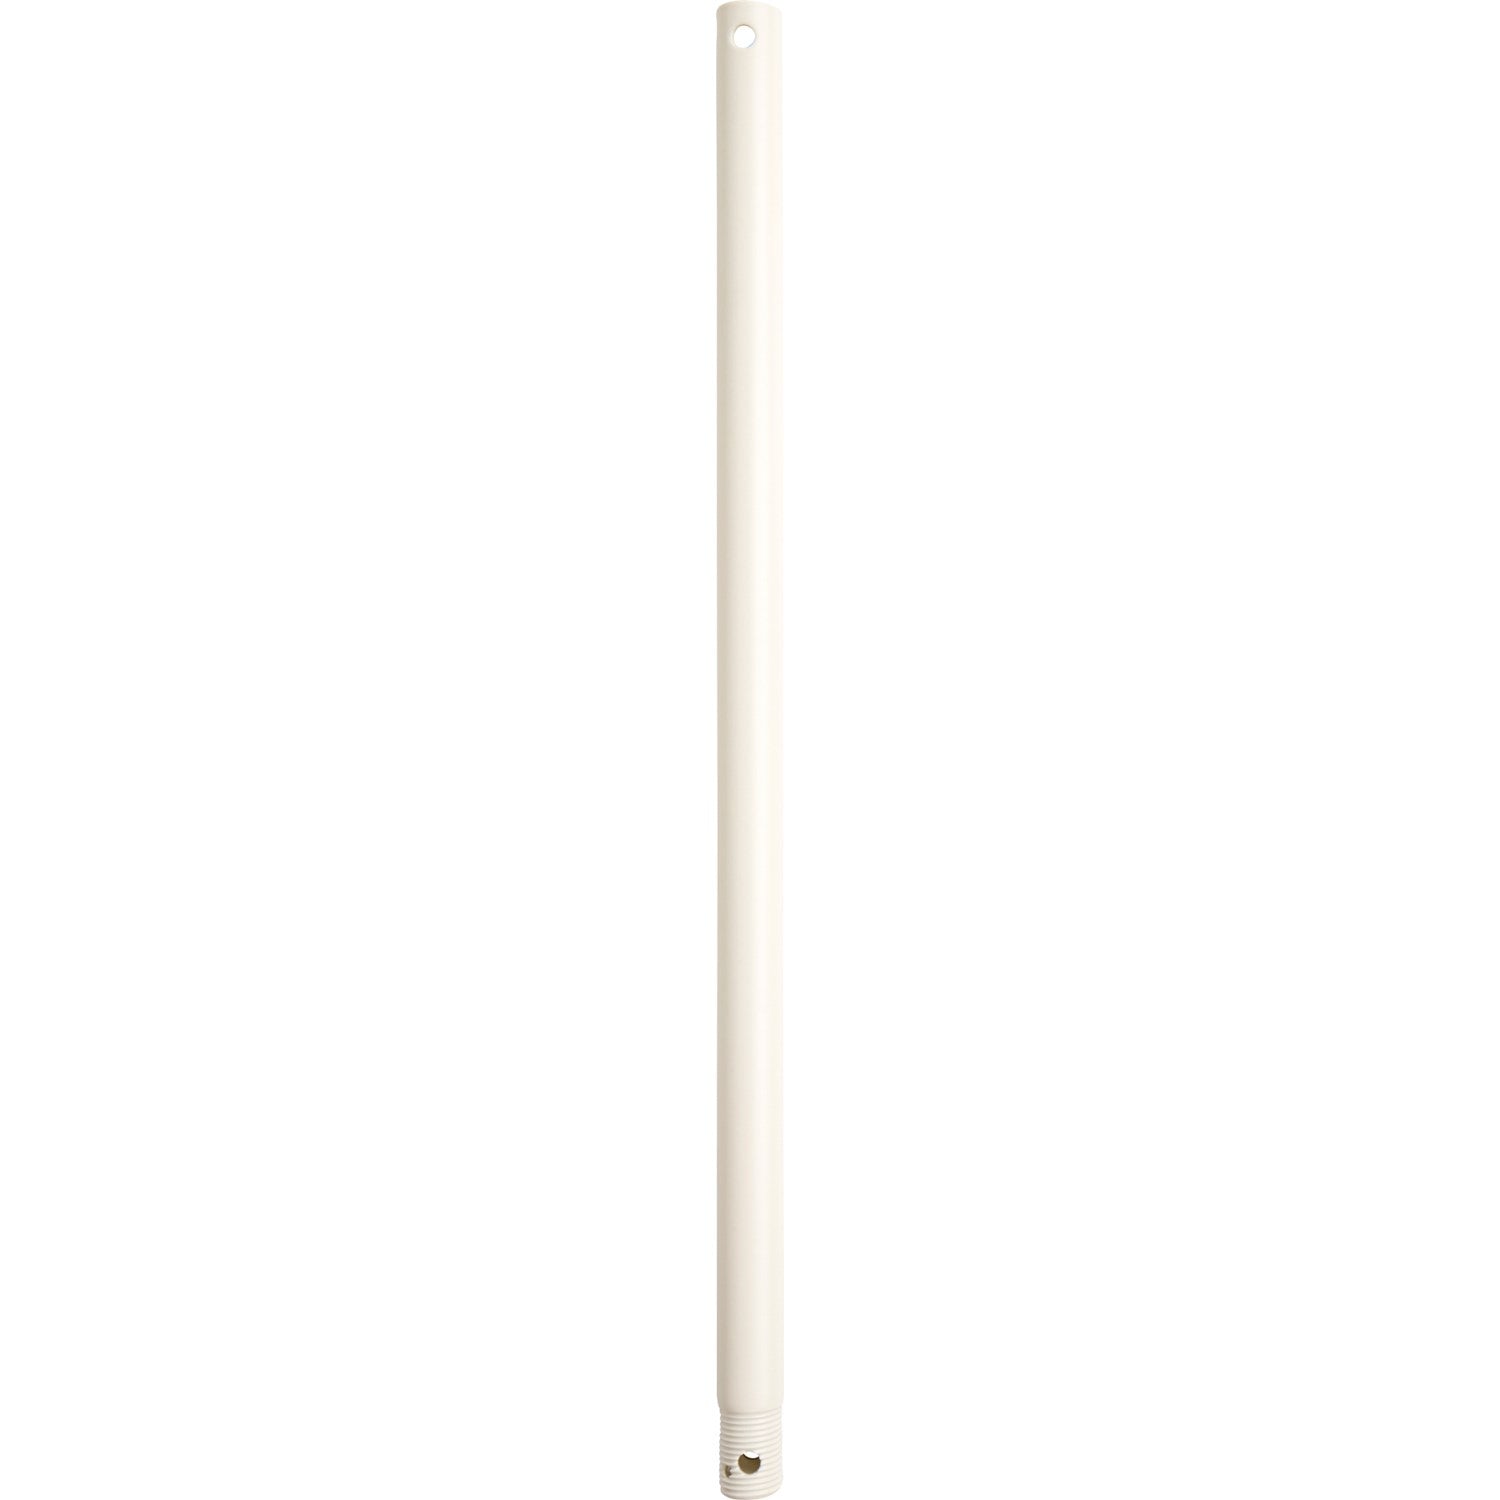 Quorum - 6-2467 - 24" Universal Downrod - 24 in. Downrods - Antique White